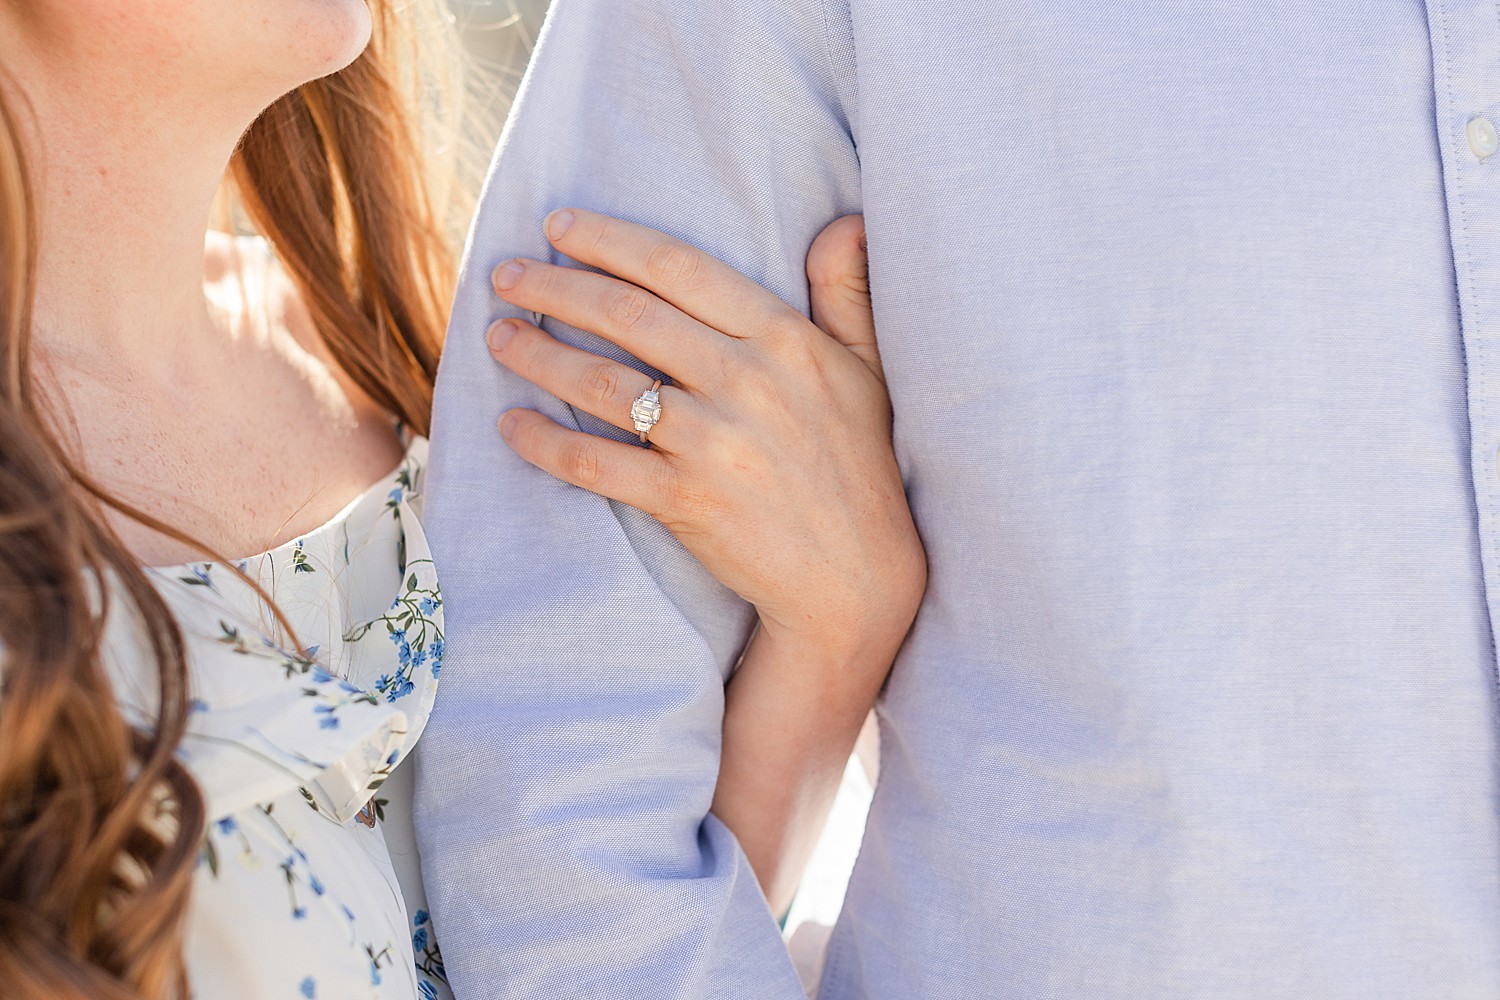 woman wraps hand around man's arm showing off engagement ring